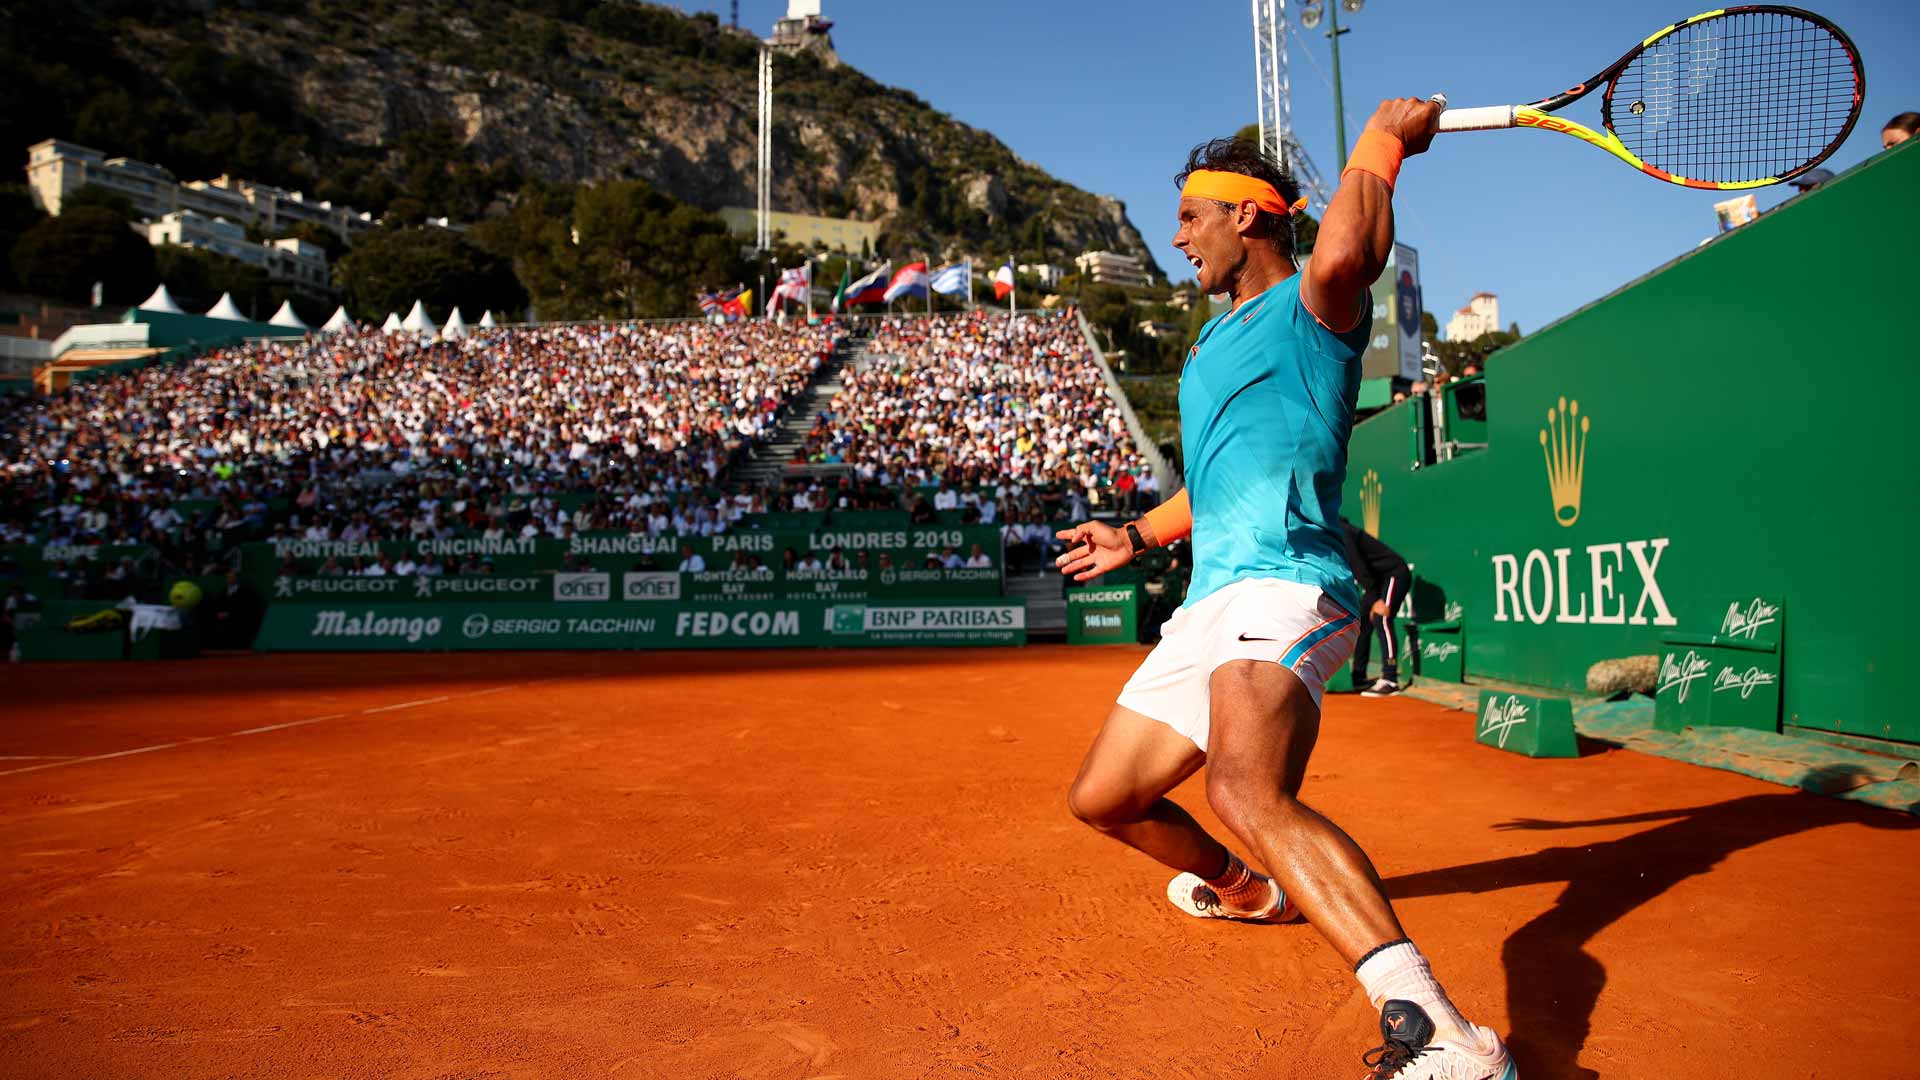 Rafael Nadal is an 11-time champion at the Rolex Monte-Carlo Masters.